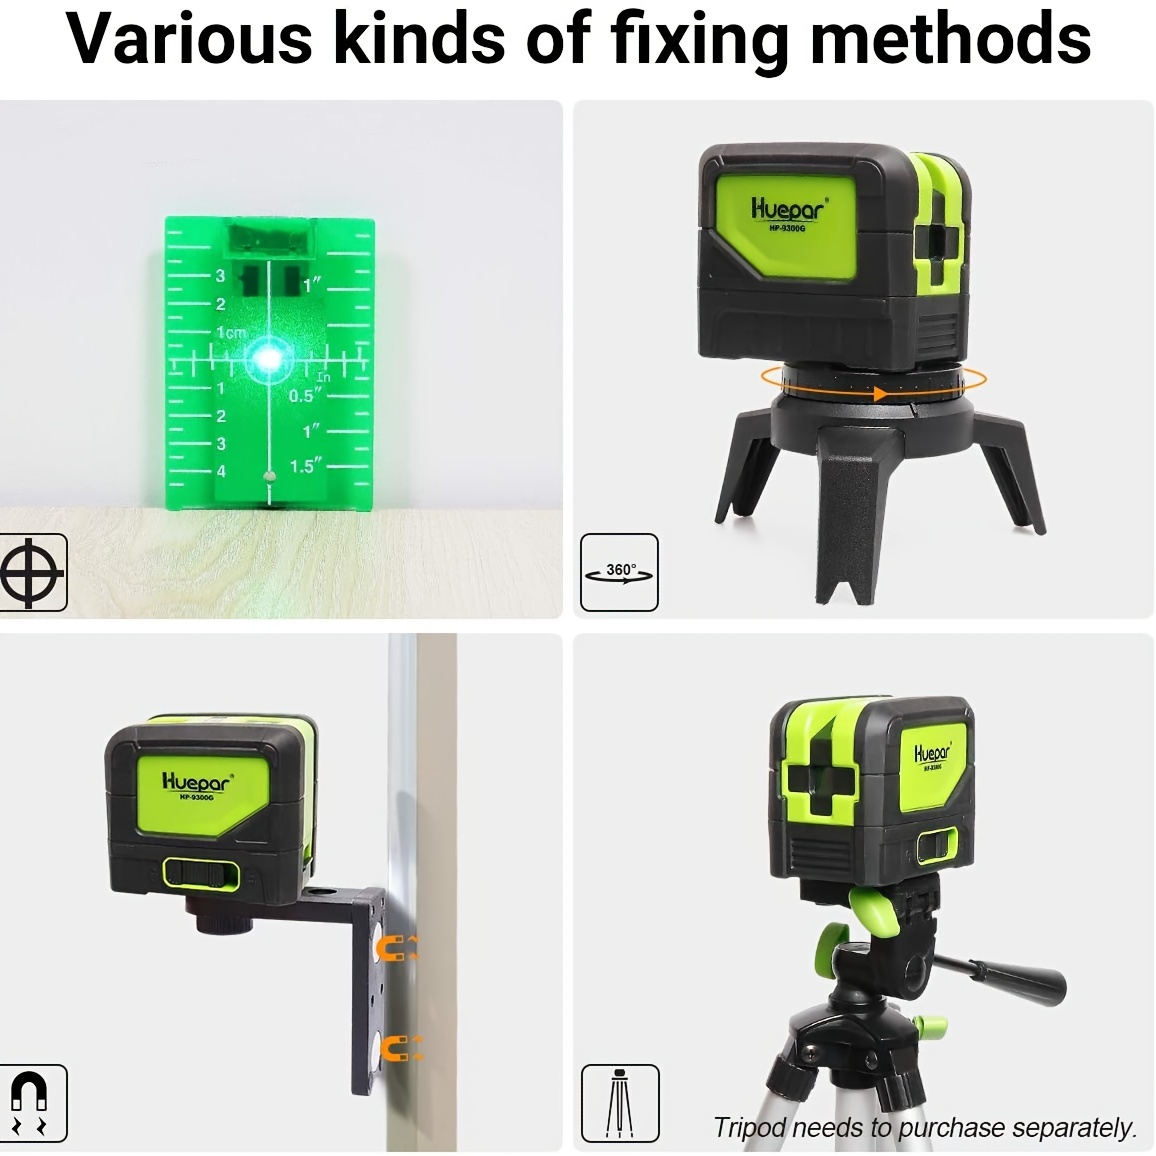 3 Point Self Leveling Green Laser Level